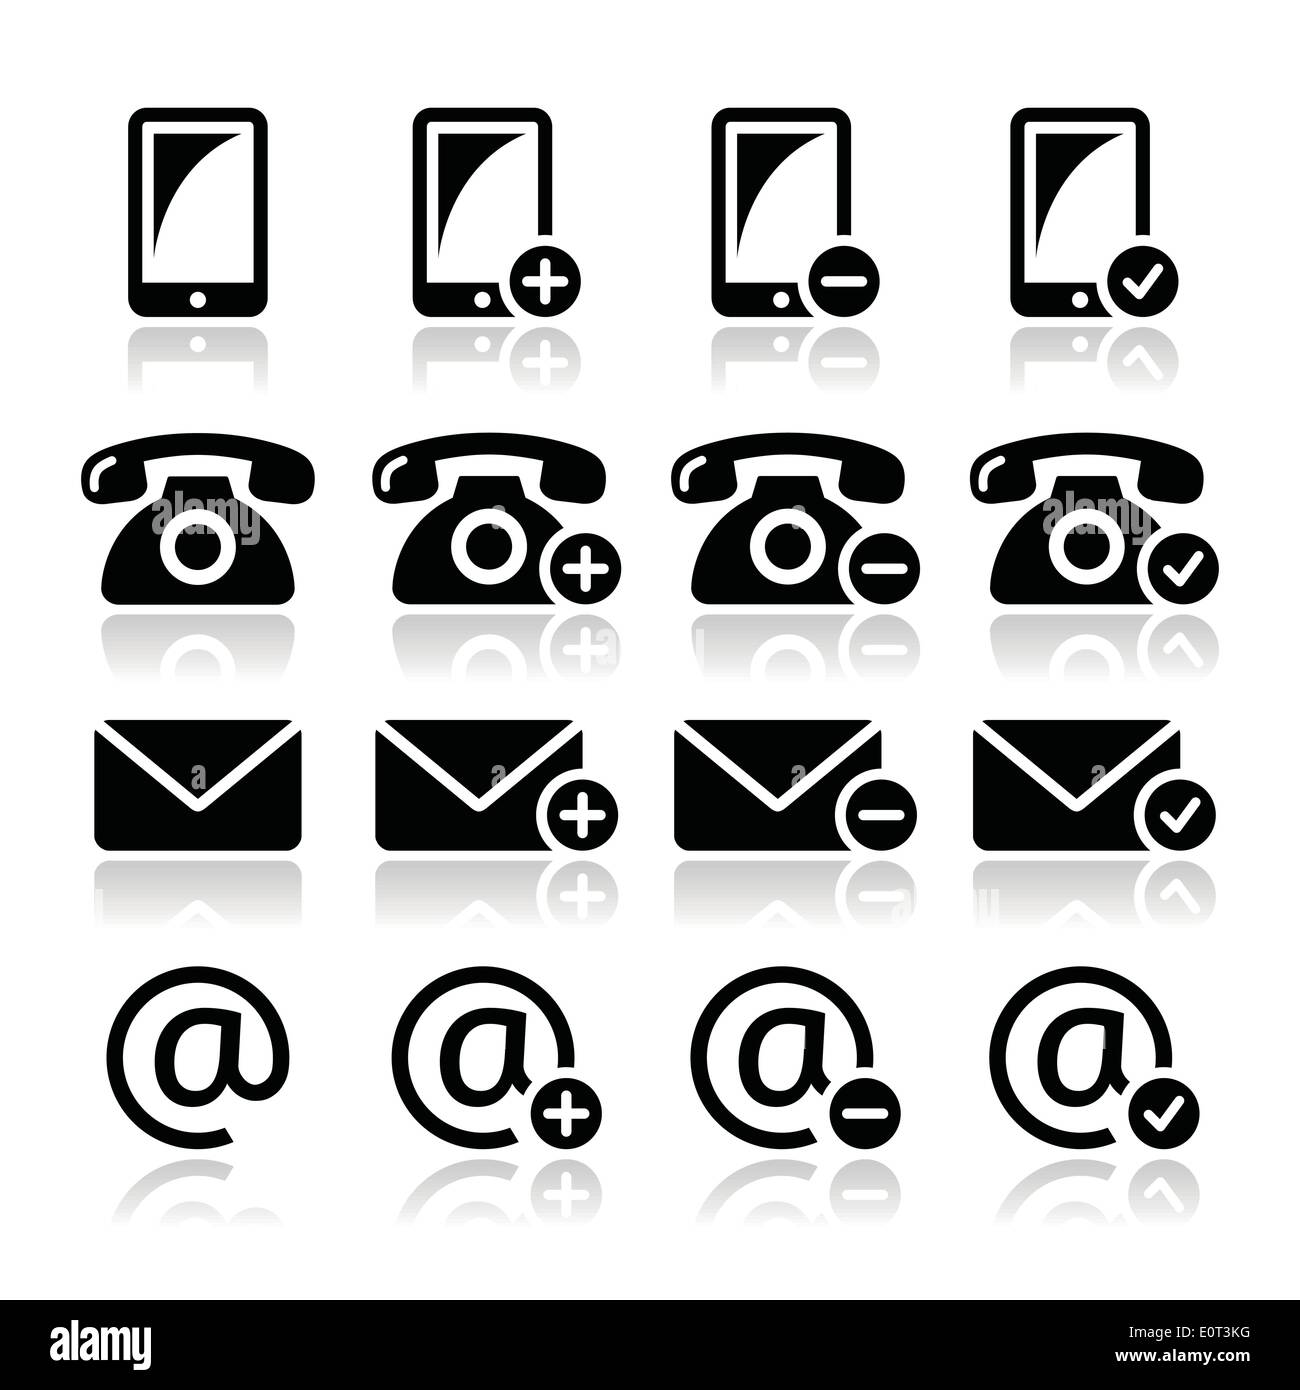 Contact icons set - mobile, phone, email, envelope Stock Vector